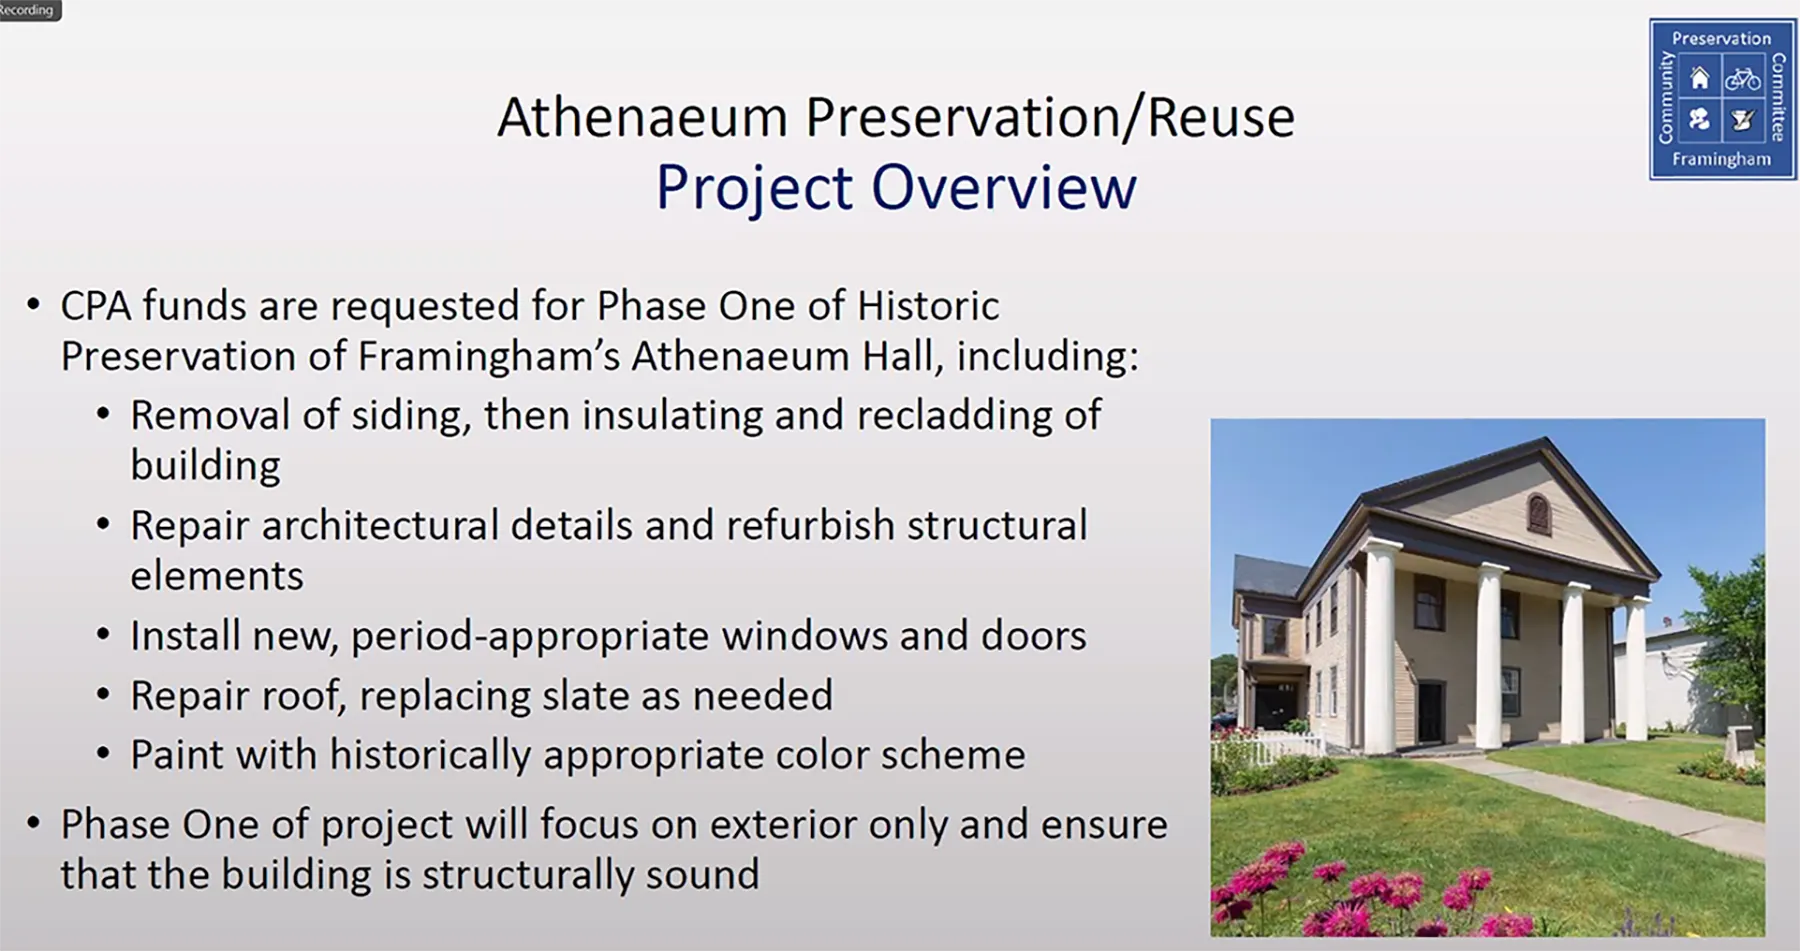 Info about what would be funded in the Athenaeum project